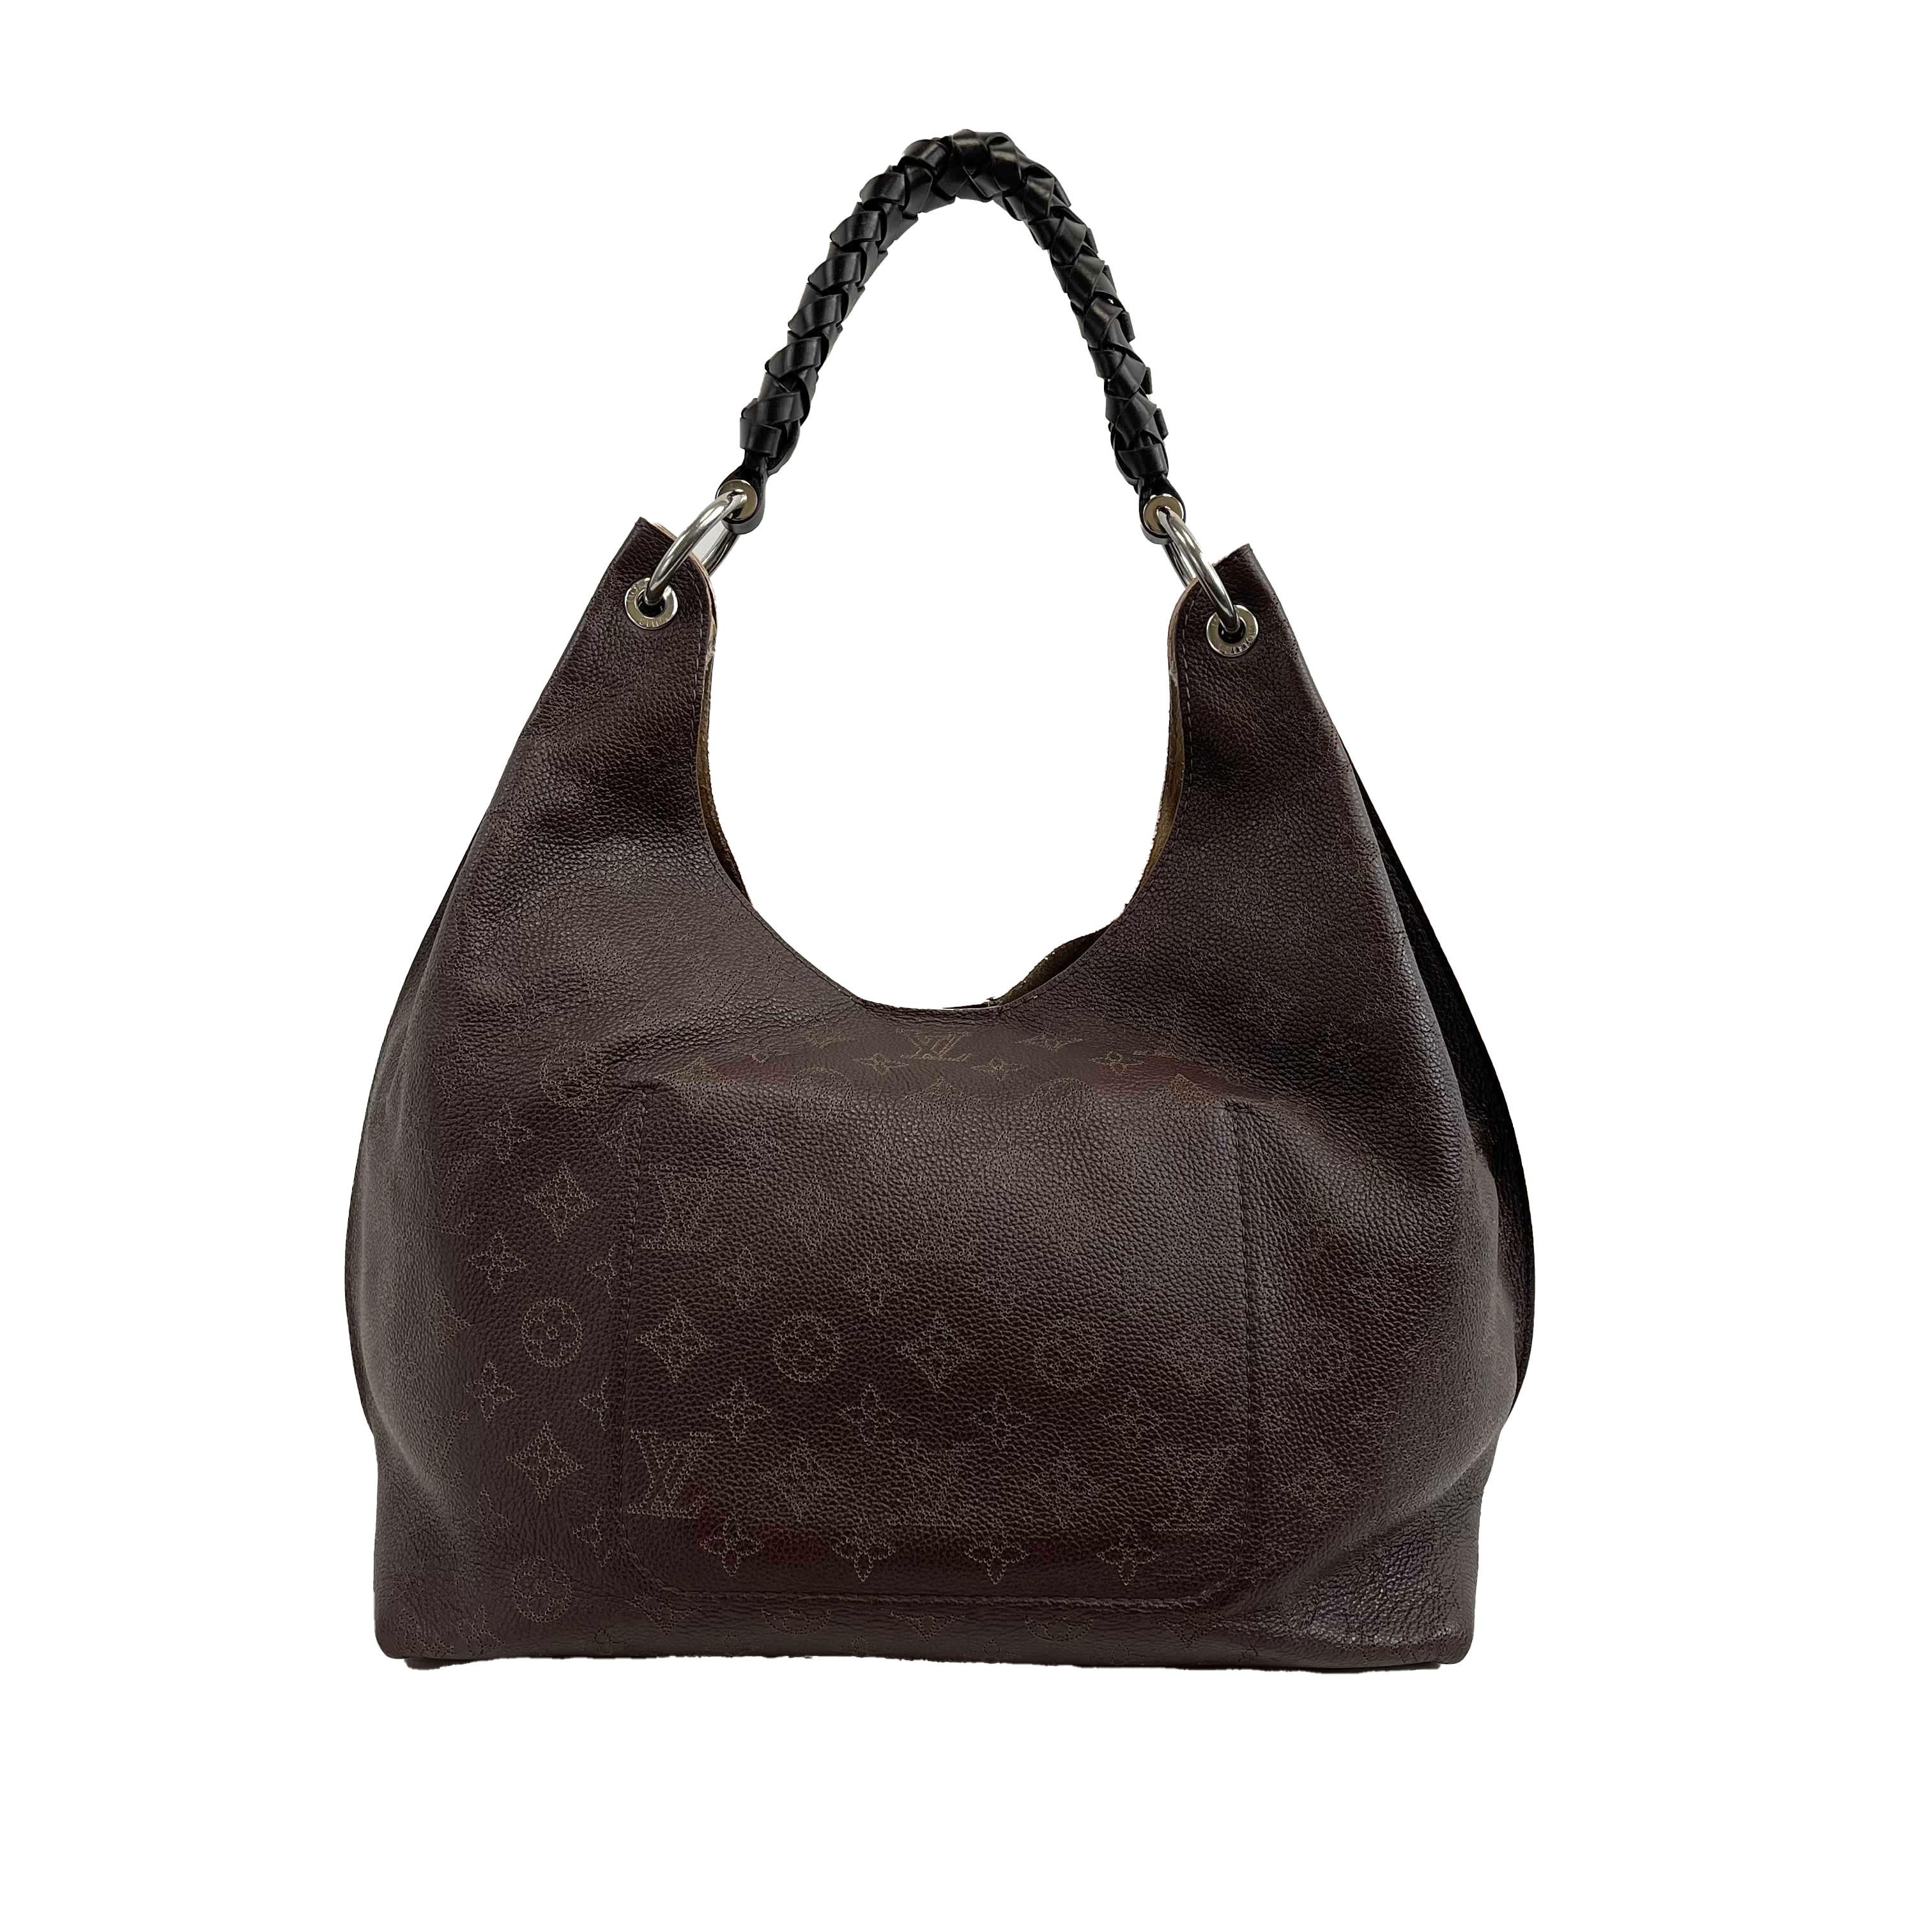 Louis Vuitton - Carmel Hobo Mahina Leather Brown Monogram Shoulder Bag w/ Charm

Description

* Chocolate Brown/Cashmere Beige
* Mahina perforated calf leather
* Calf leather trim
* Microfiber lining
* Silver hardware
* Magnetic closure
* Interior